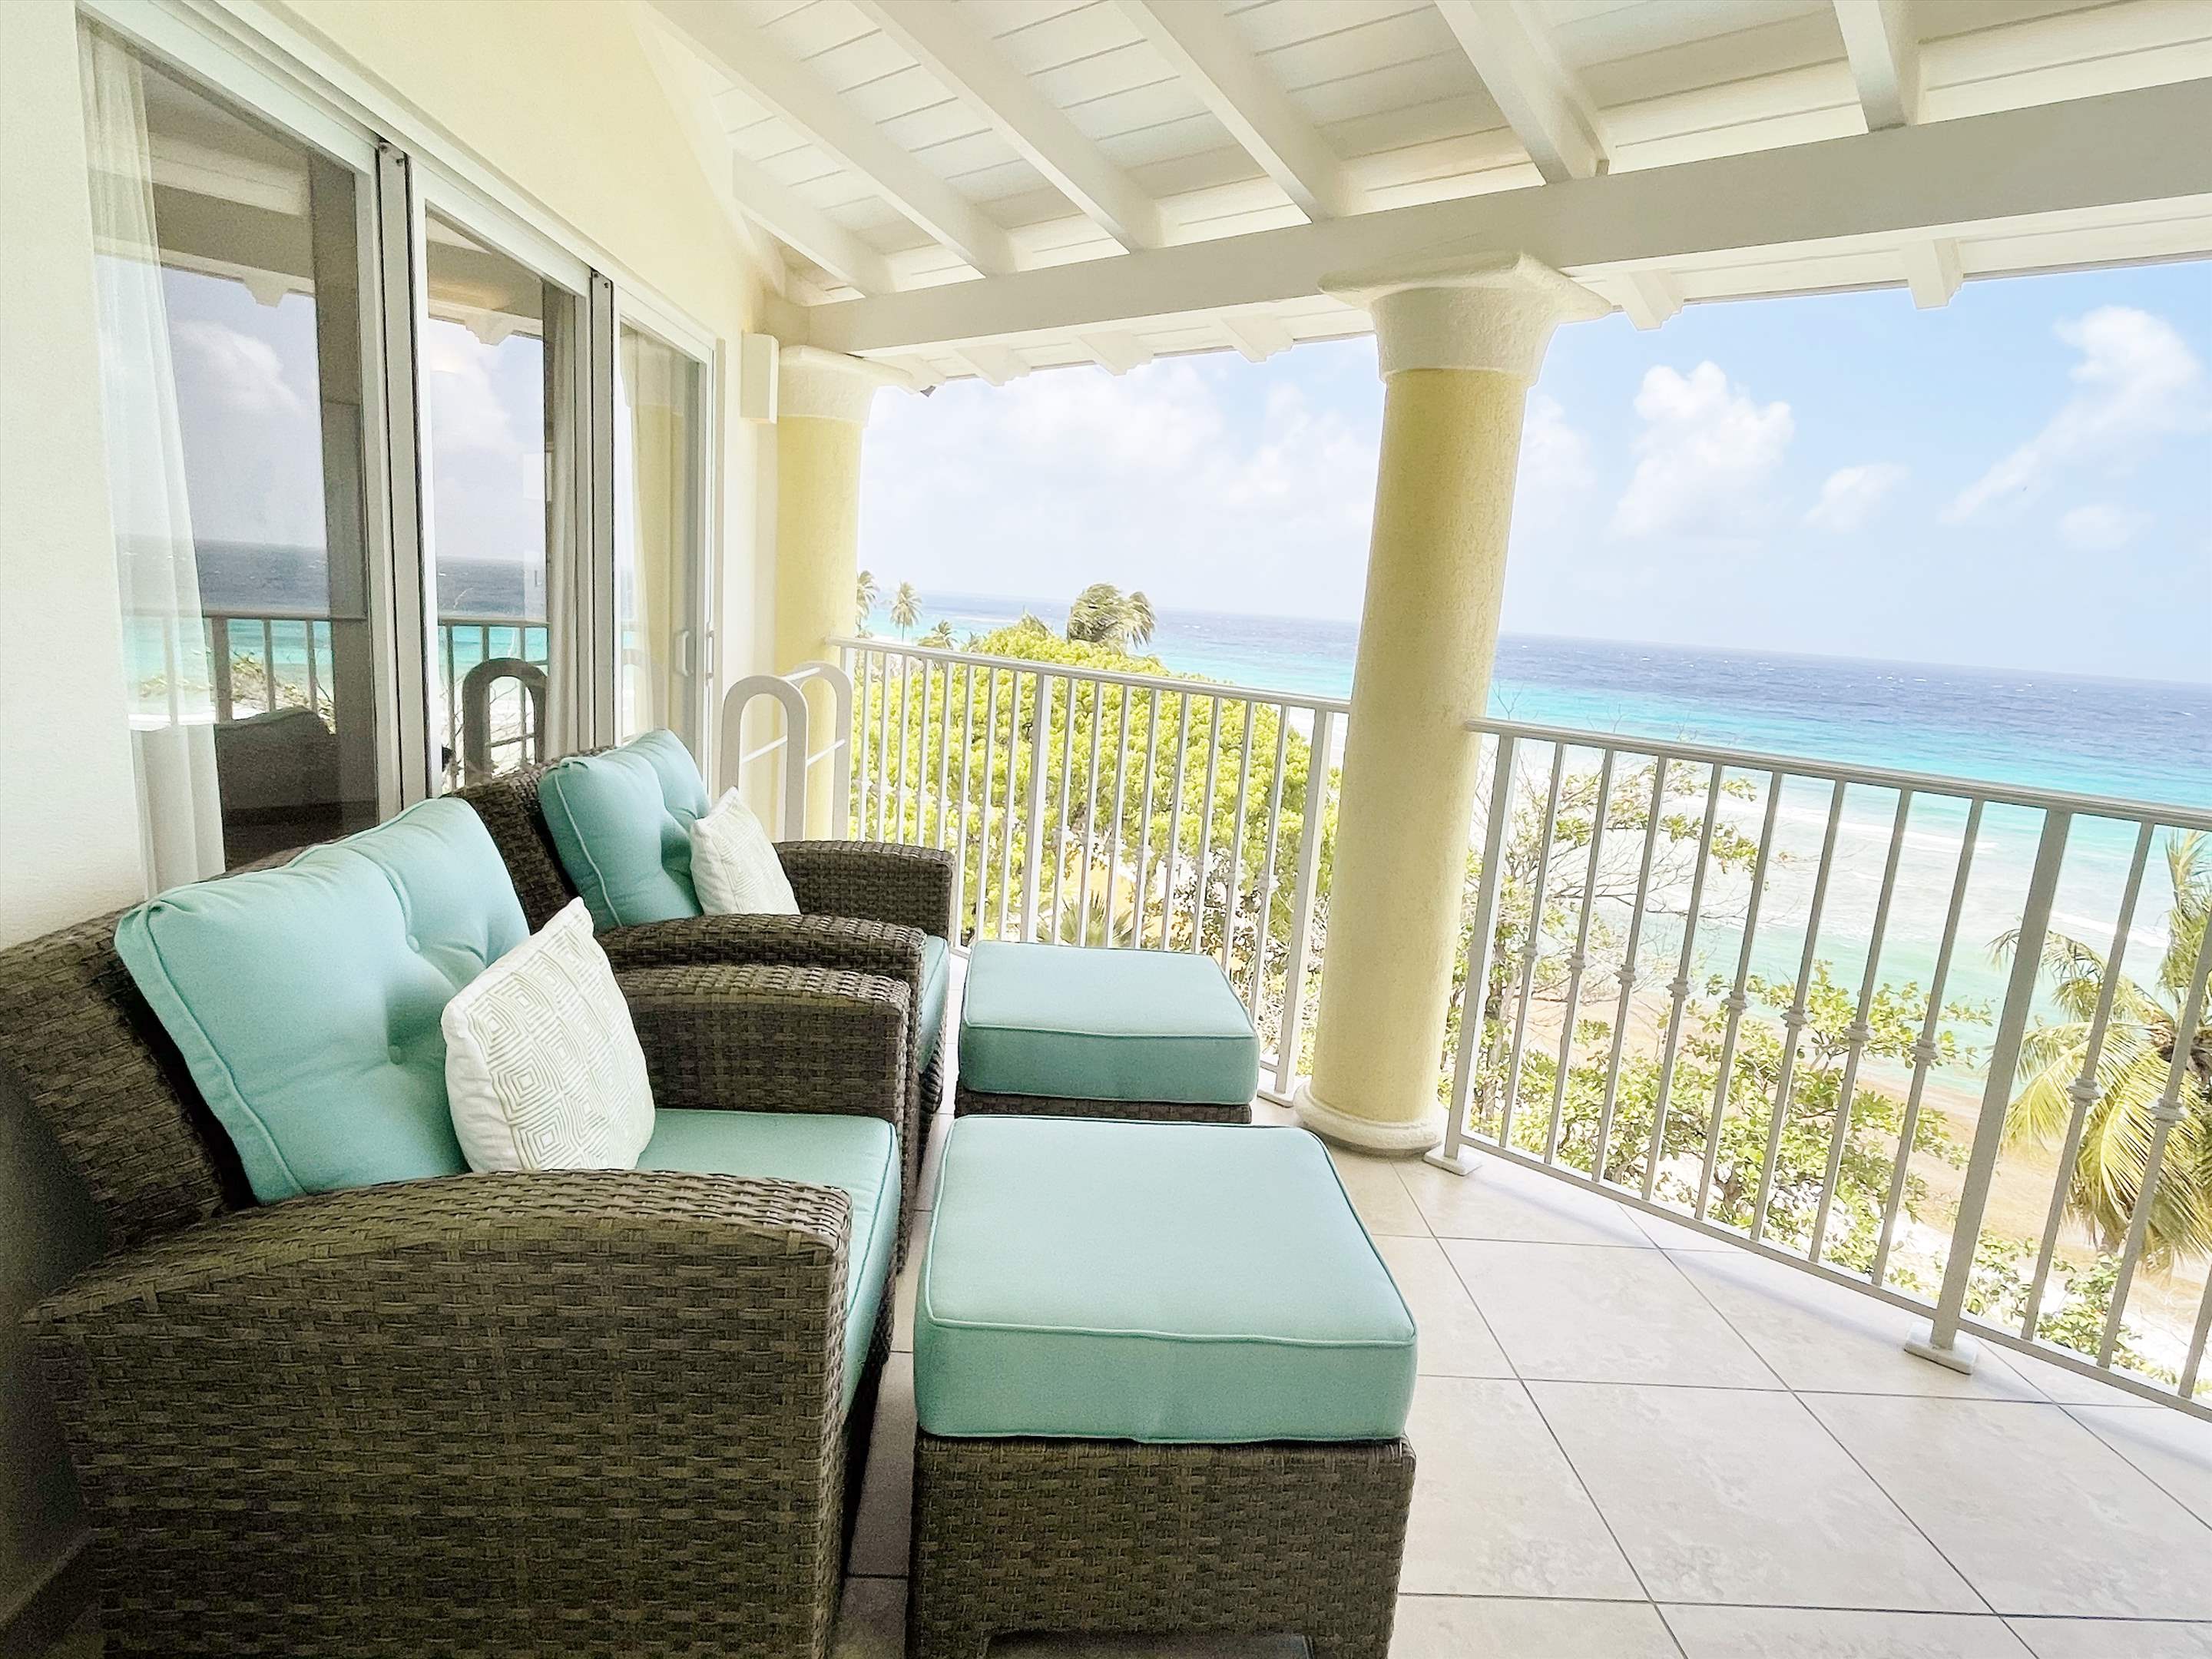 Sapphire Beach 505 , 3 Bedroom , 3 bedroom apartment in St. Lawrence Gap & South Coast, Barbados Photo #2